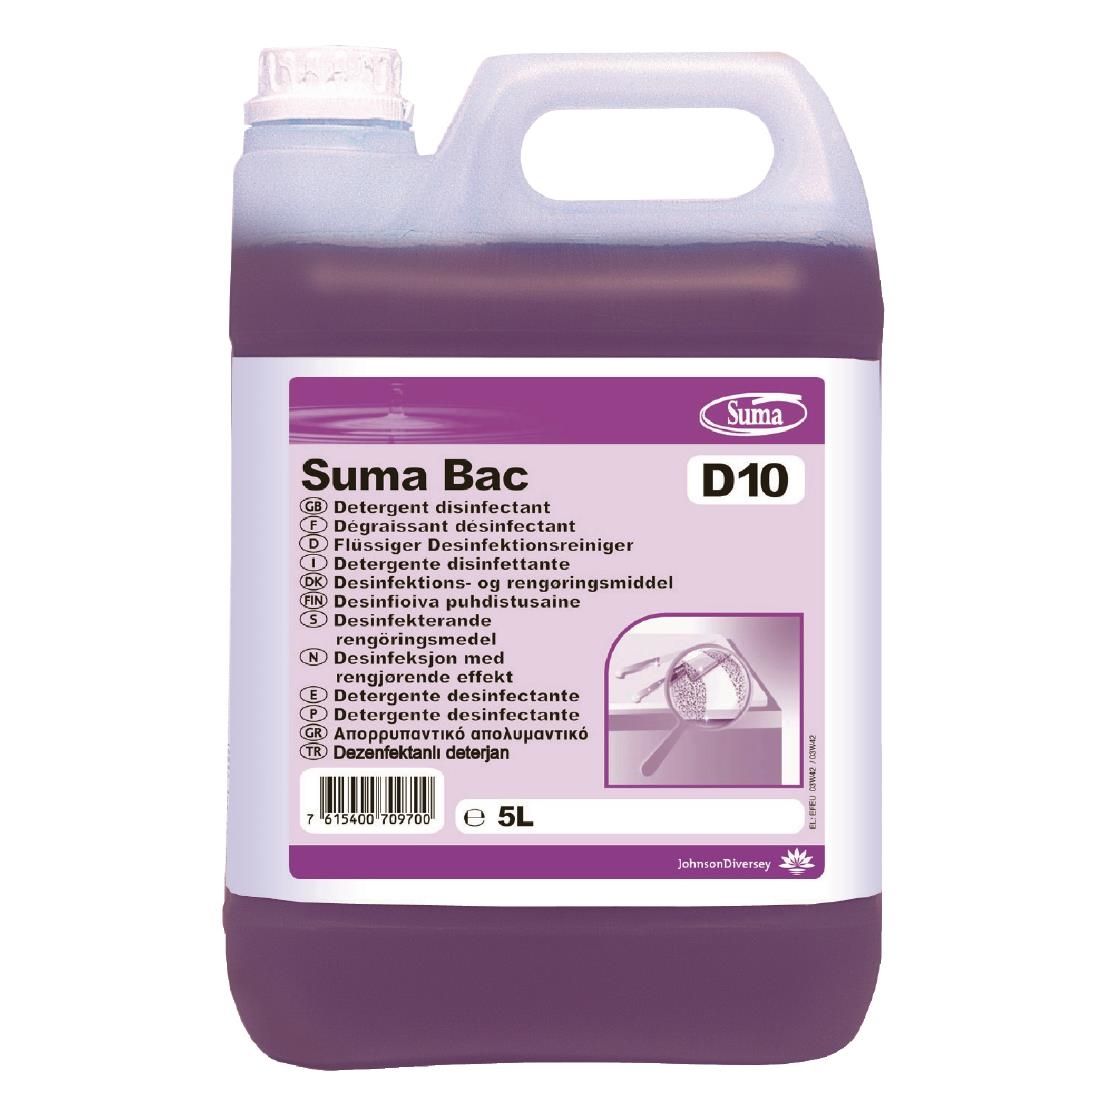 Suma Bac D10 Cleaner and Sanitiser Concentrate 5Ltr (2 Pack)